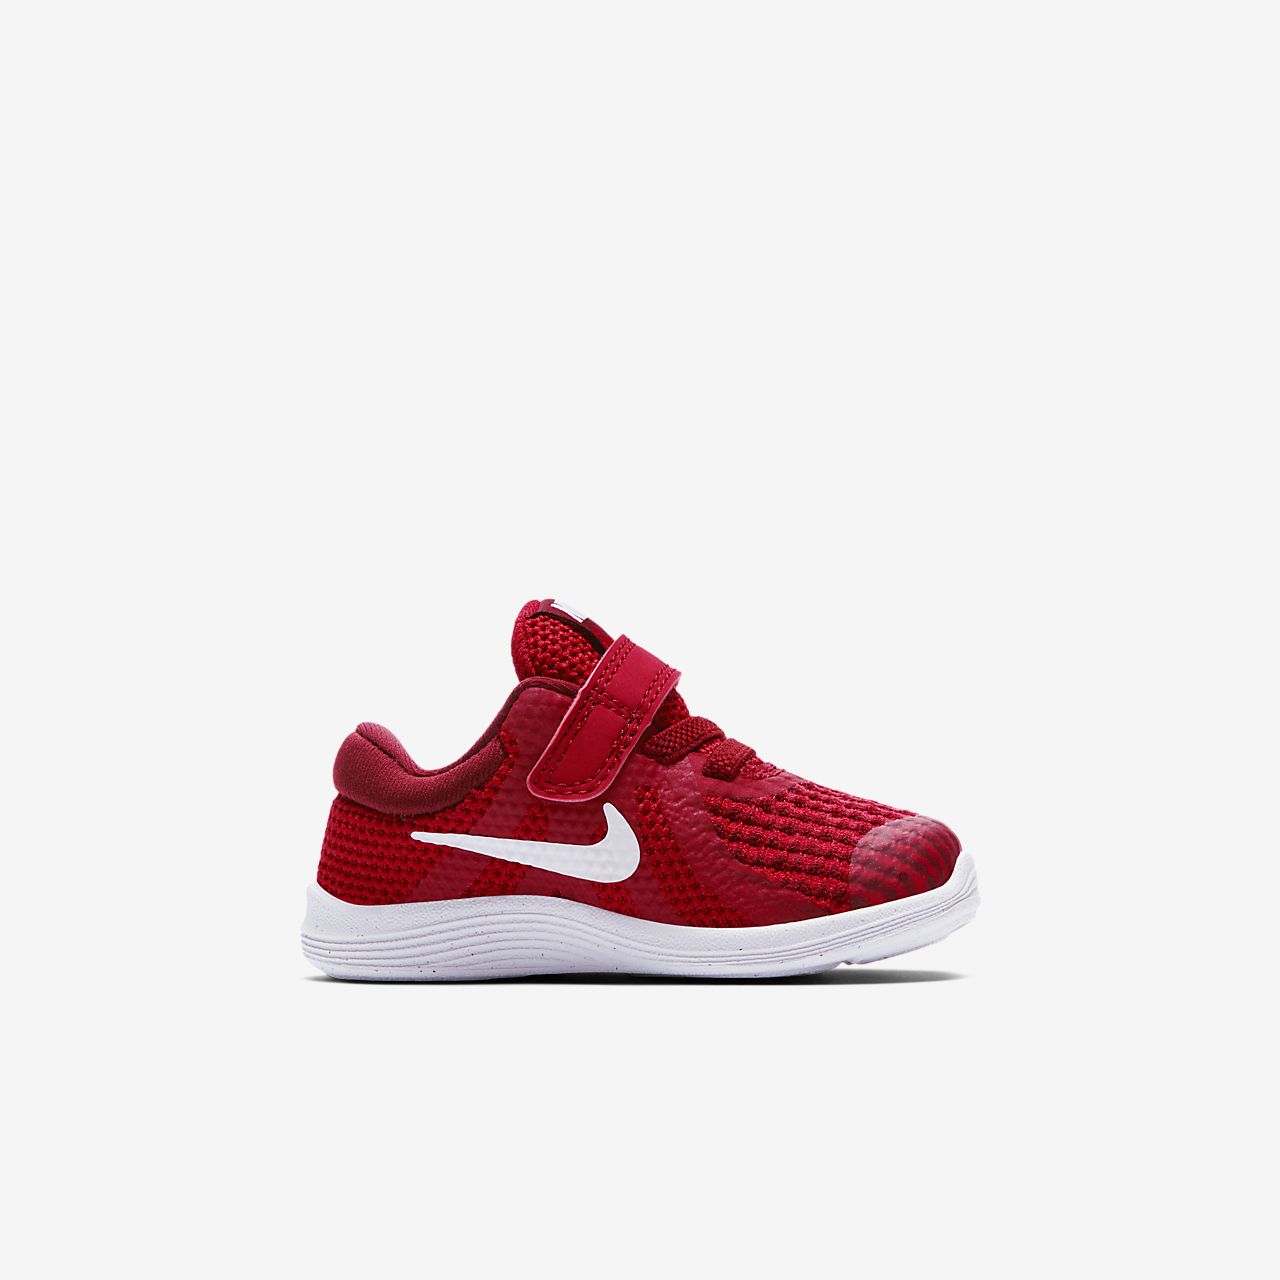 toddler red nike shoes